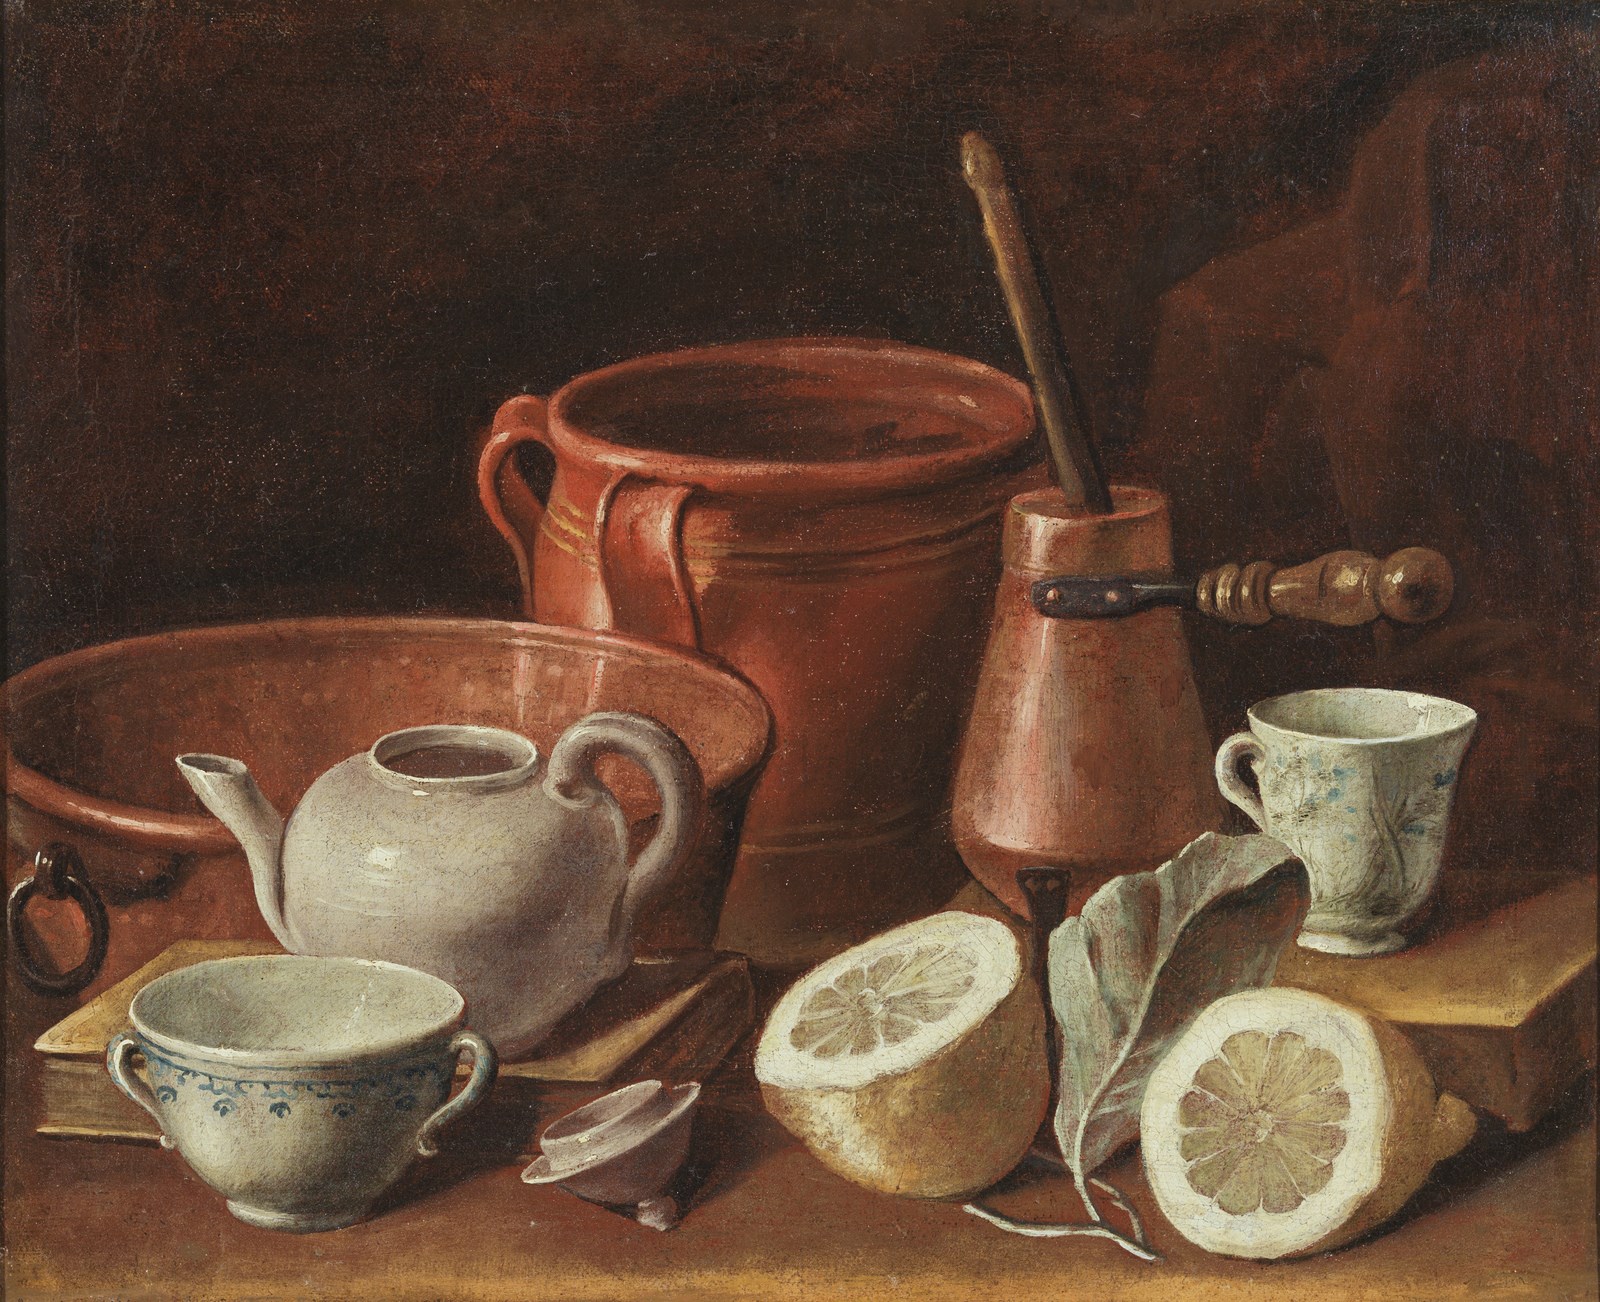 Still life with ceramics, coppers and lemons (Carlo Magini)